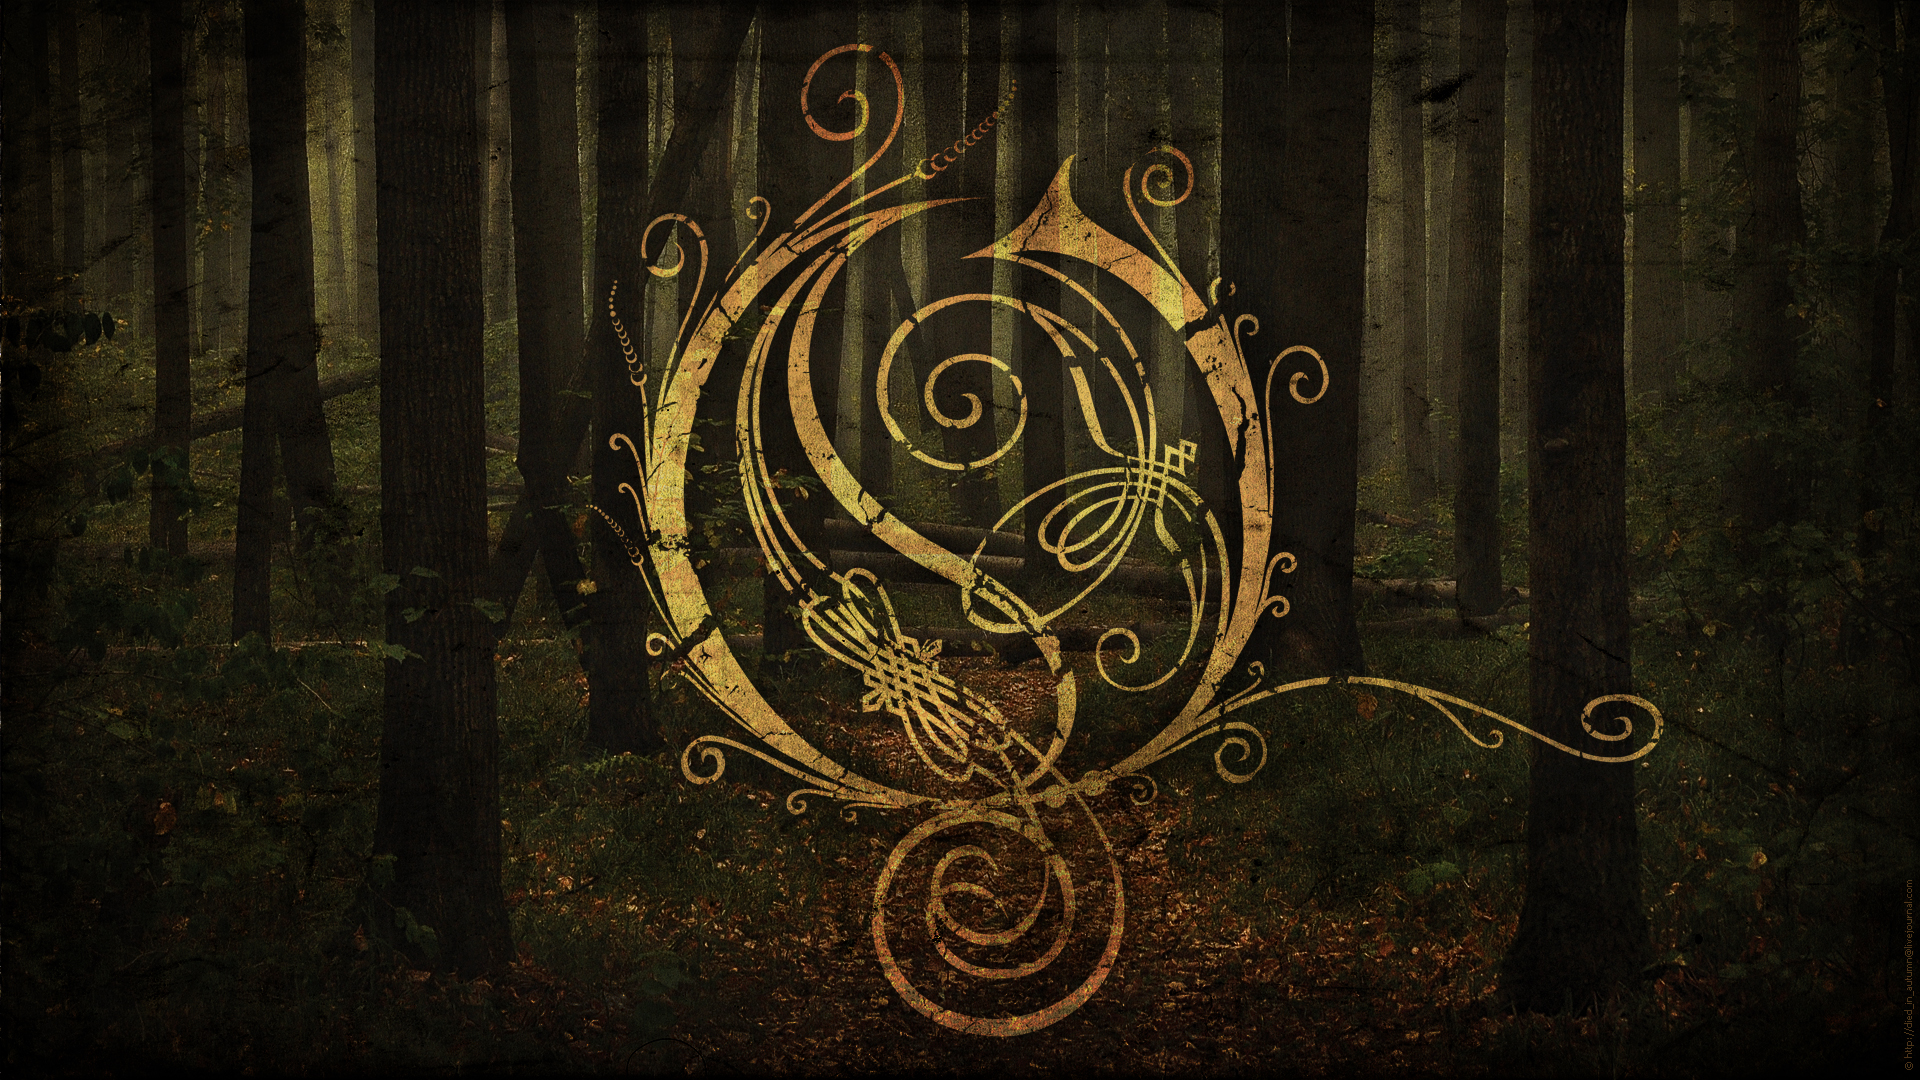 General 1920x1080 forest trees dark Opeth music progressive metal progressive rock metal music rock music band logo